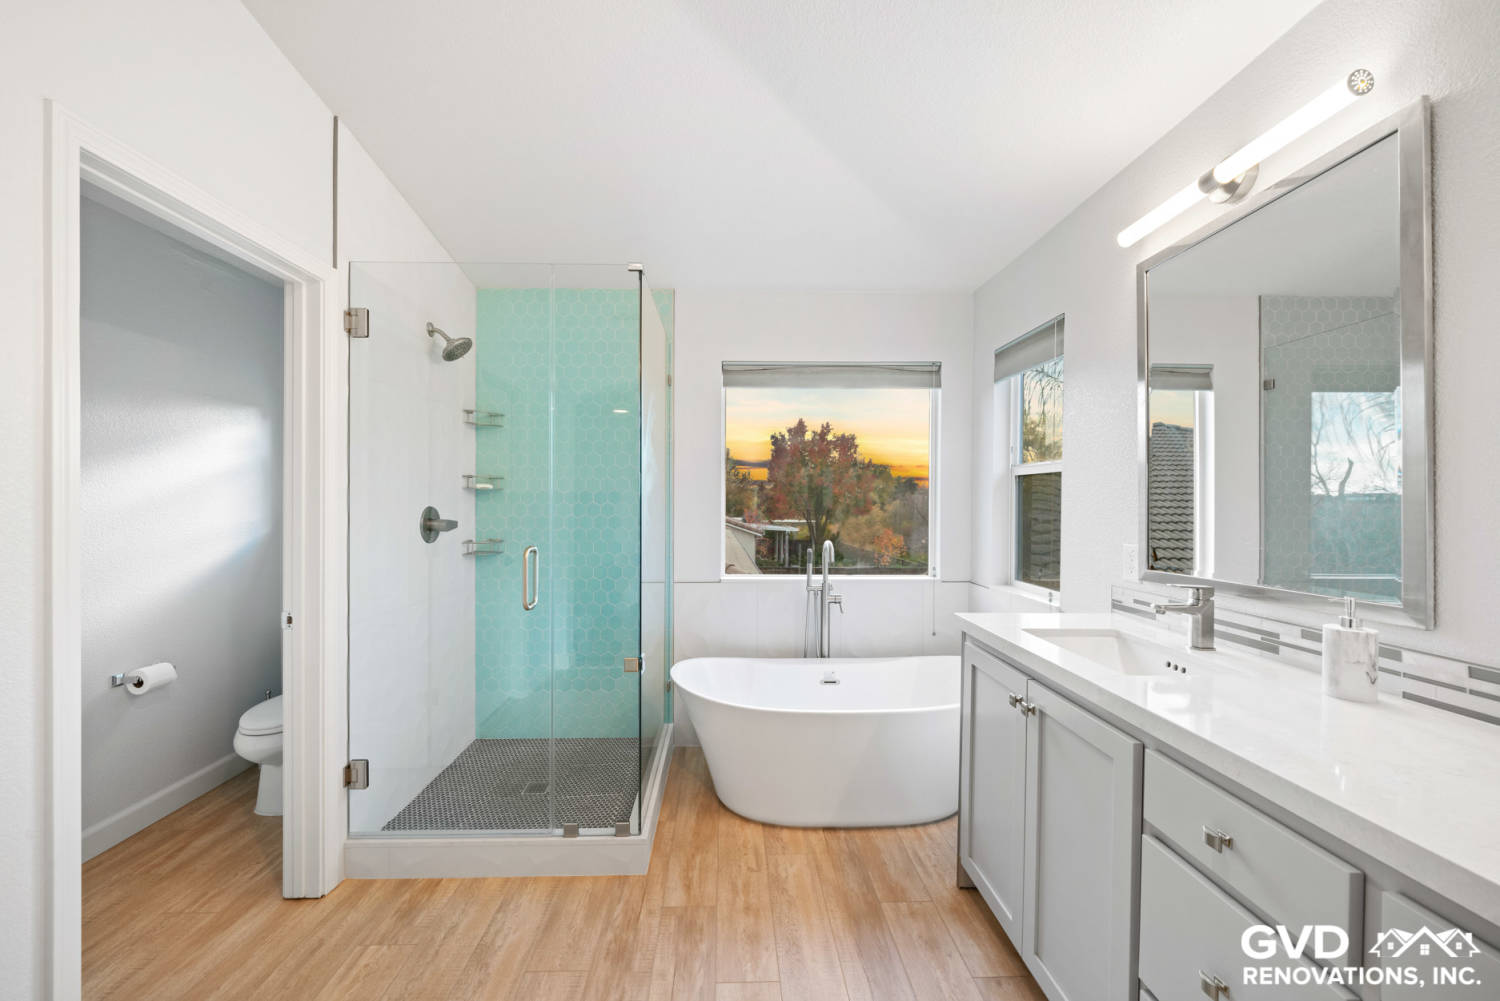 Average Cost Of A Bathroom Remodel, How Much Does It Cost To Remodel A Bathroom In California